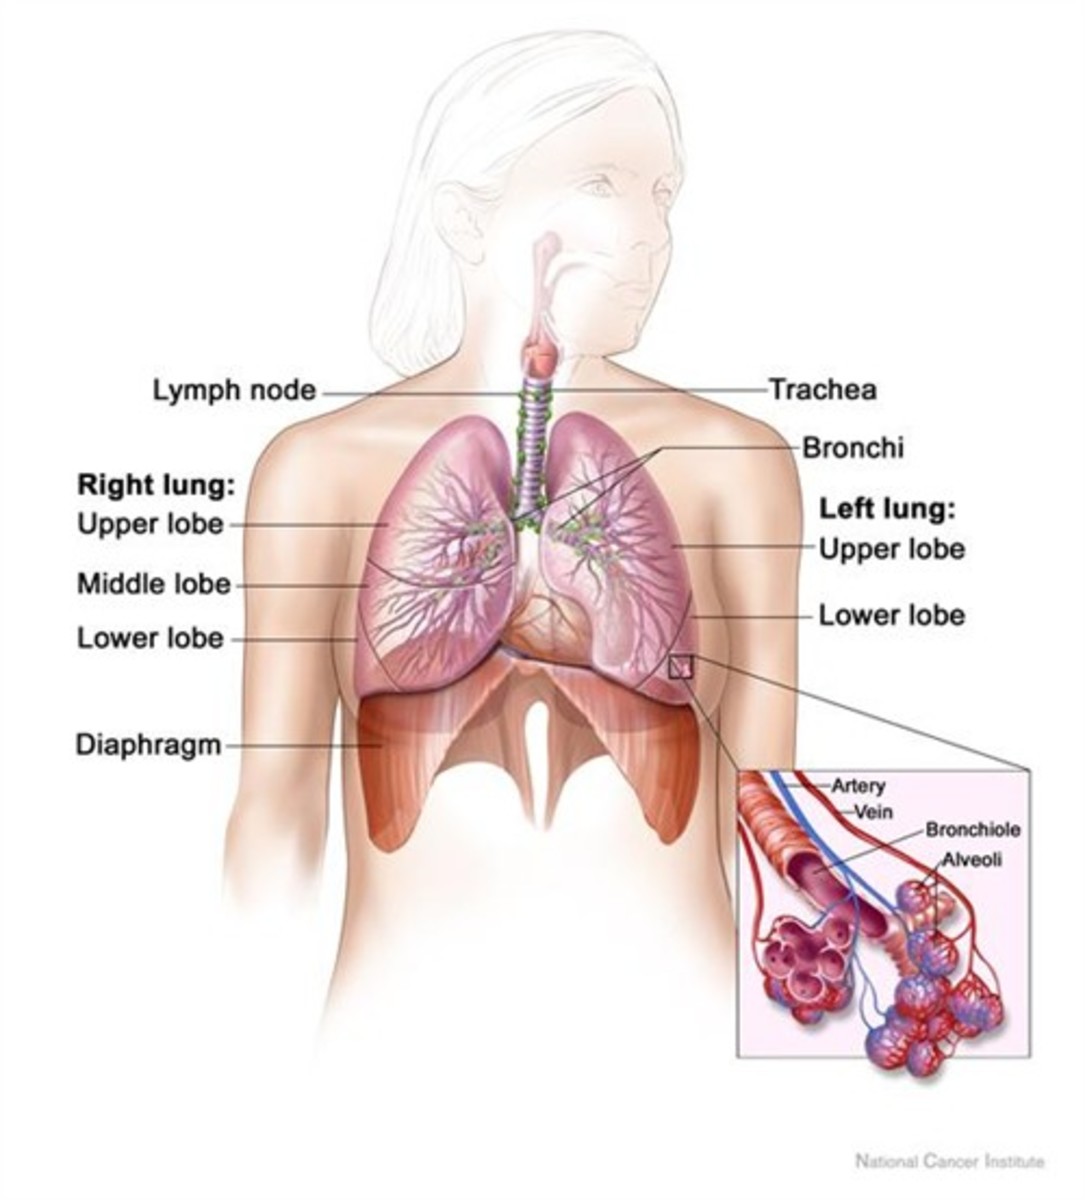 The respiratory system and the relaxed, dome-shaped diaphragm